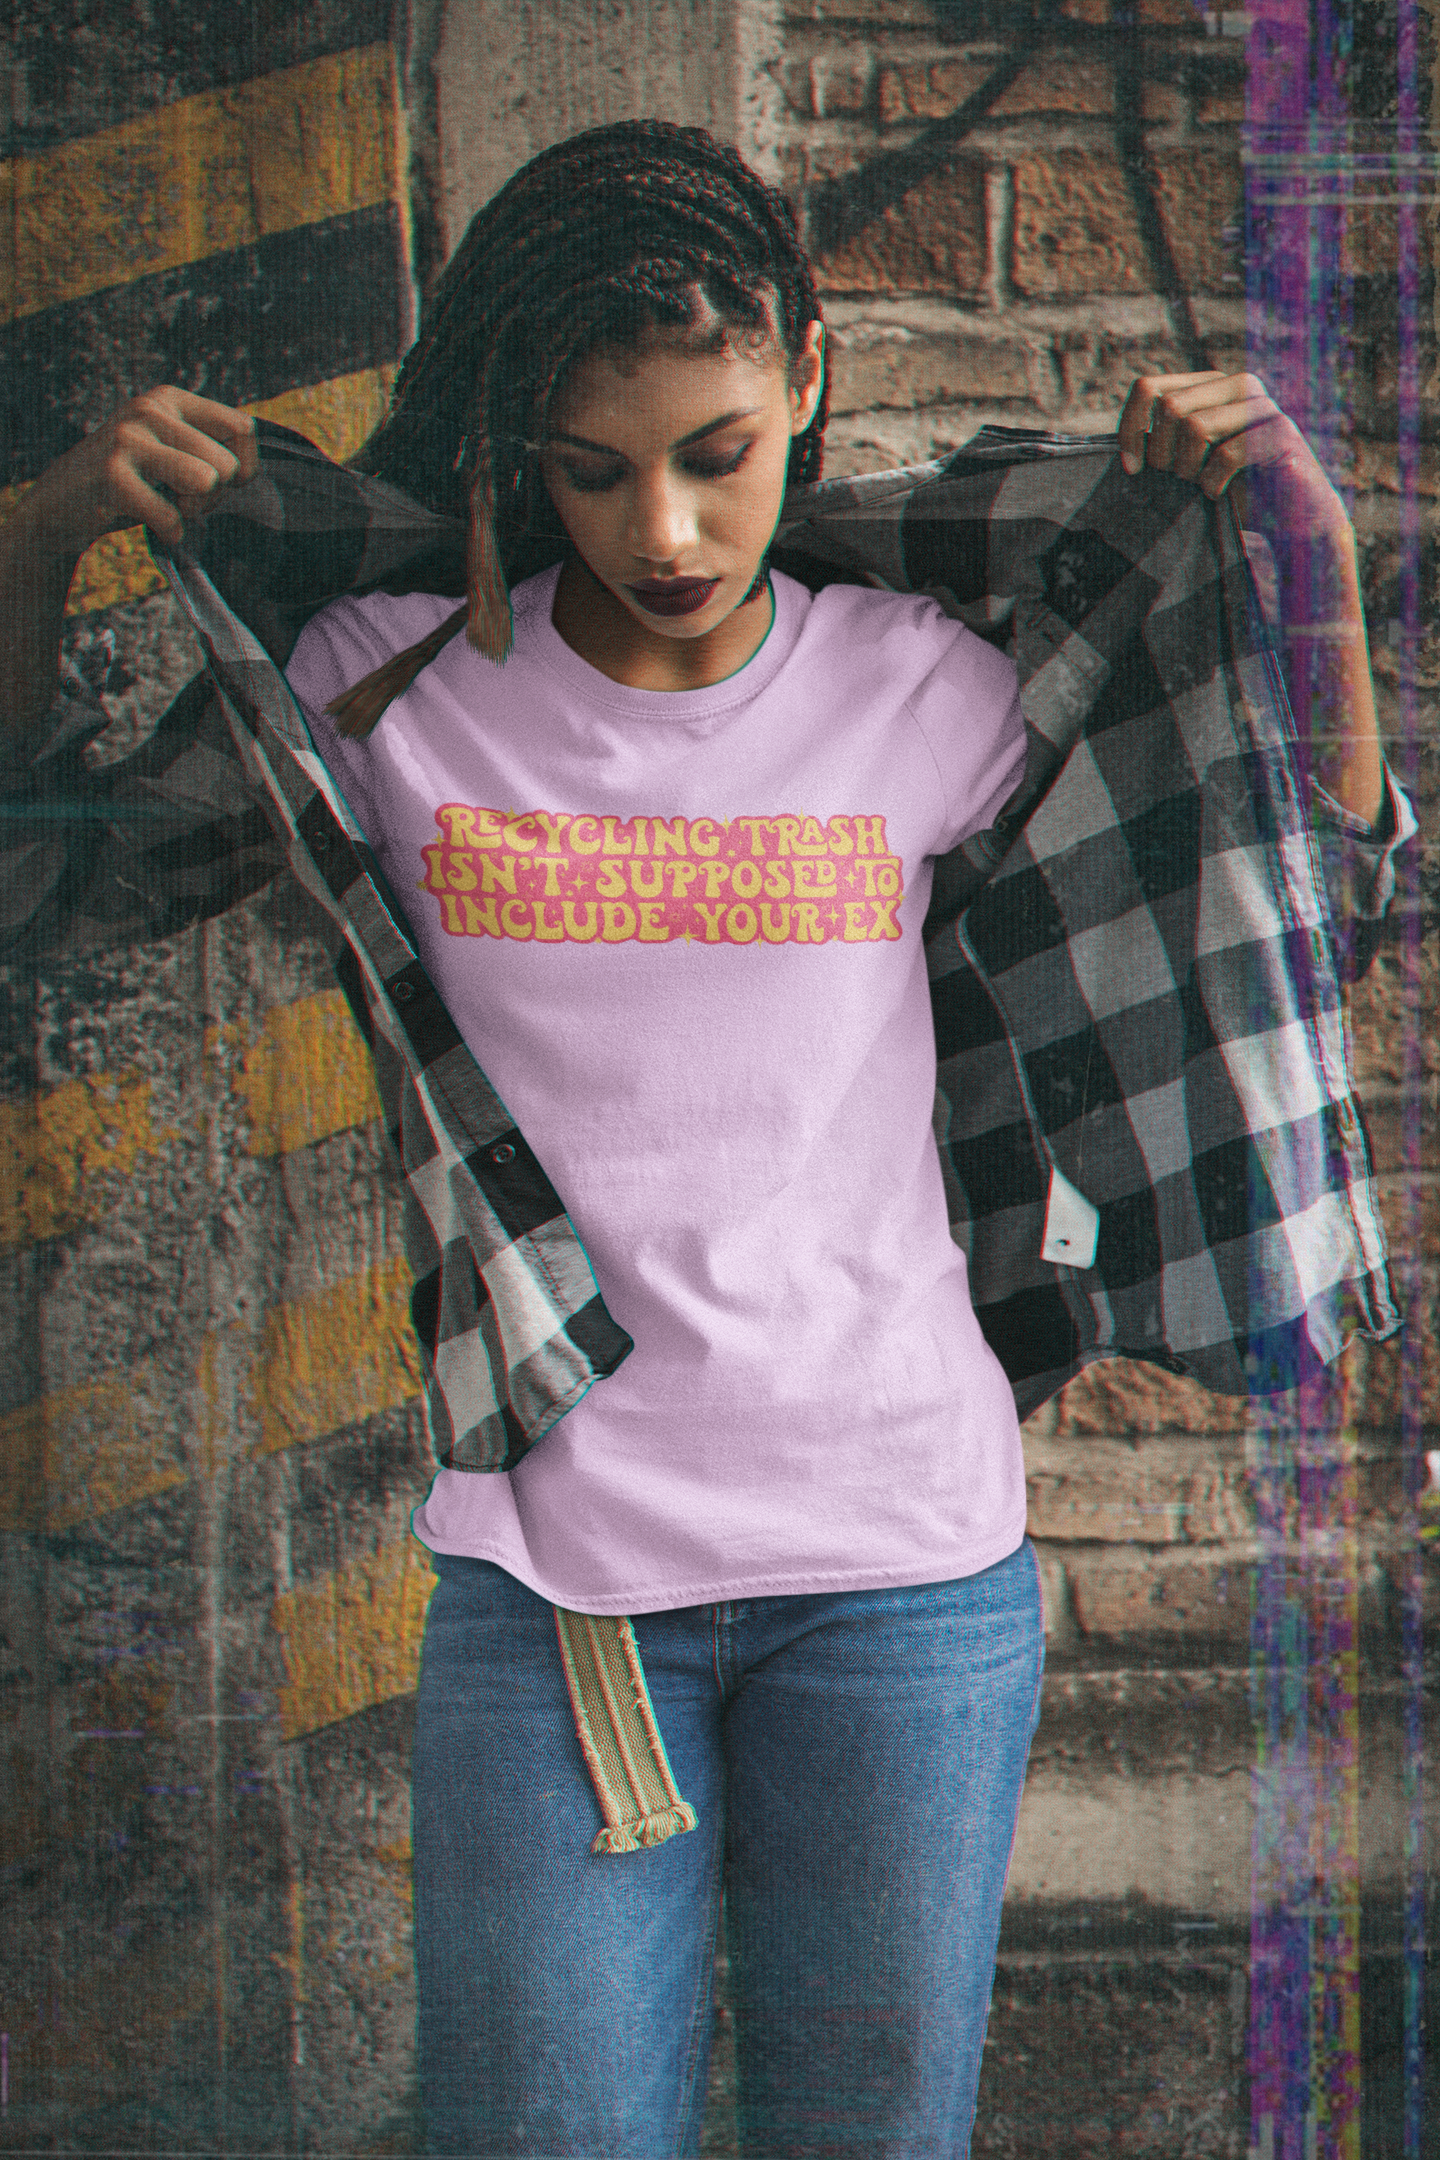 Recycling Trash Isn’t Supposed To Include Your Ex Unisex Feminist T-Shirt- Shop Women’s Rights T-shirts - Feminist Trash Store - Lilac Oversized Women’s T-shirt